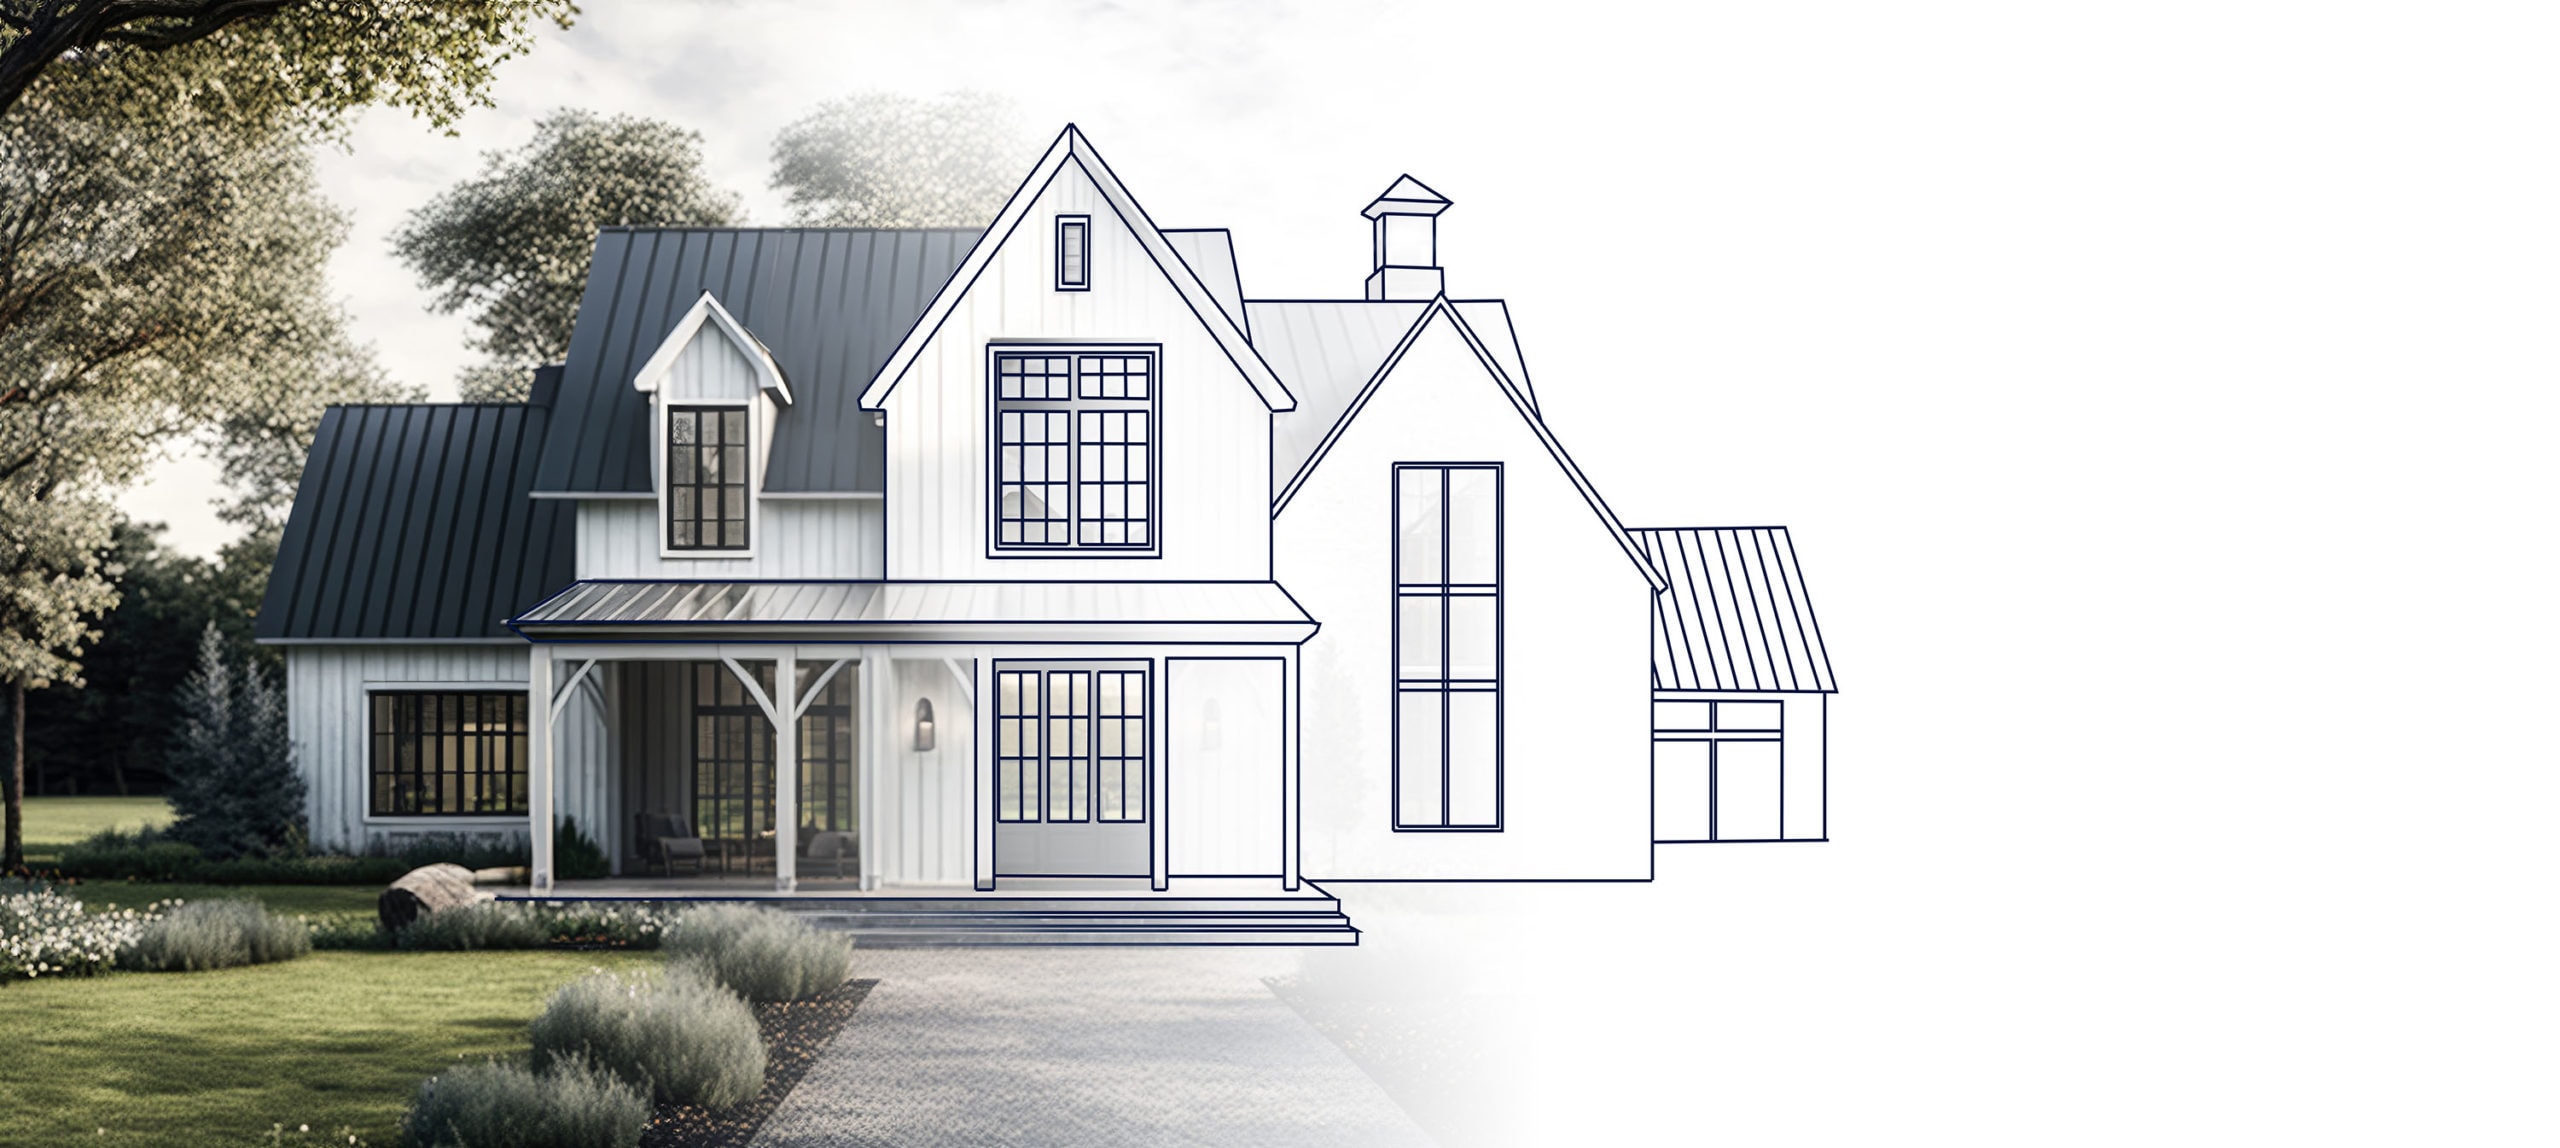 What’s It Like To Build A Custom Home In Charlotte?